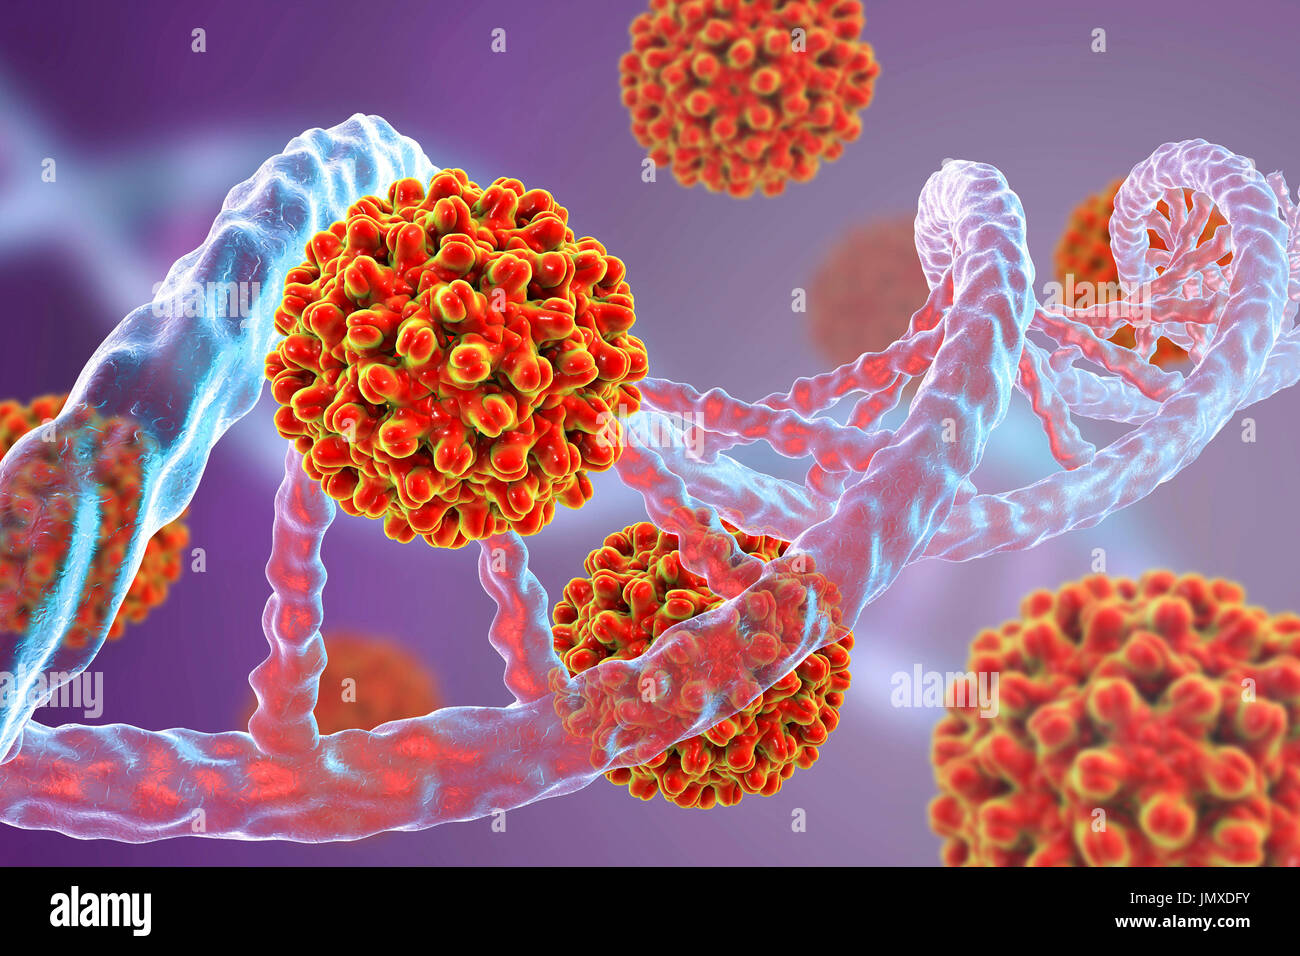 Hepatitis B viruses and DNA. Conceptual image for viral oncogenesis. Hepatitis B viruses (HBV) can integrate into host DNA as insertional mutagens causing the activation of a cellular proto-oncogene. Integration of viral DNA into the human genome is considered an early event in the carcinogenic process and can induce, through insertional mutagenesis, the alteration of gene expression and chromosomal instability. Stock Photo